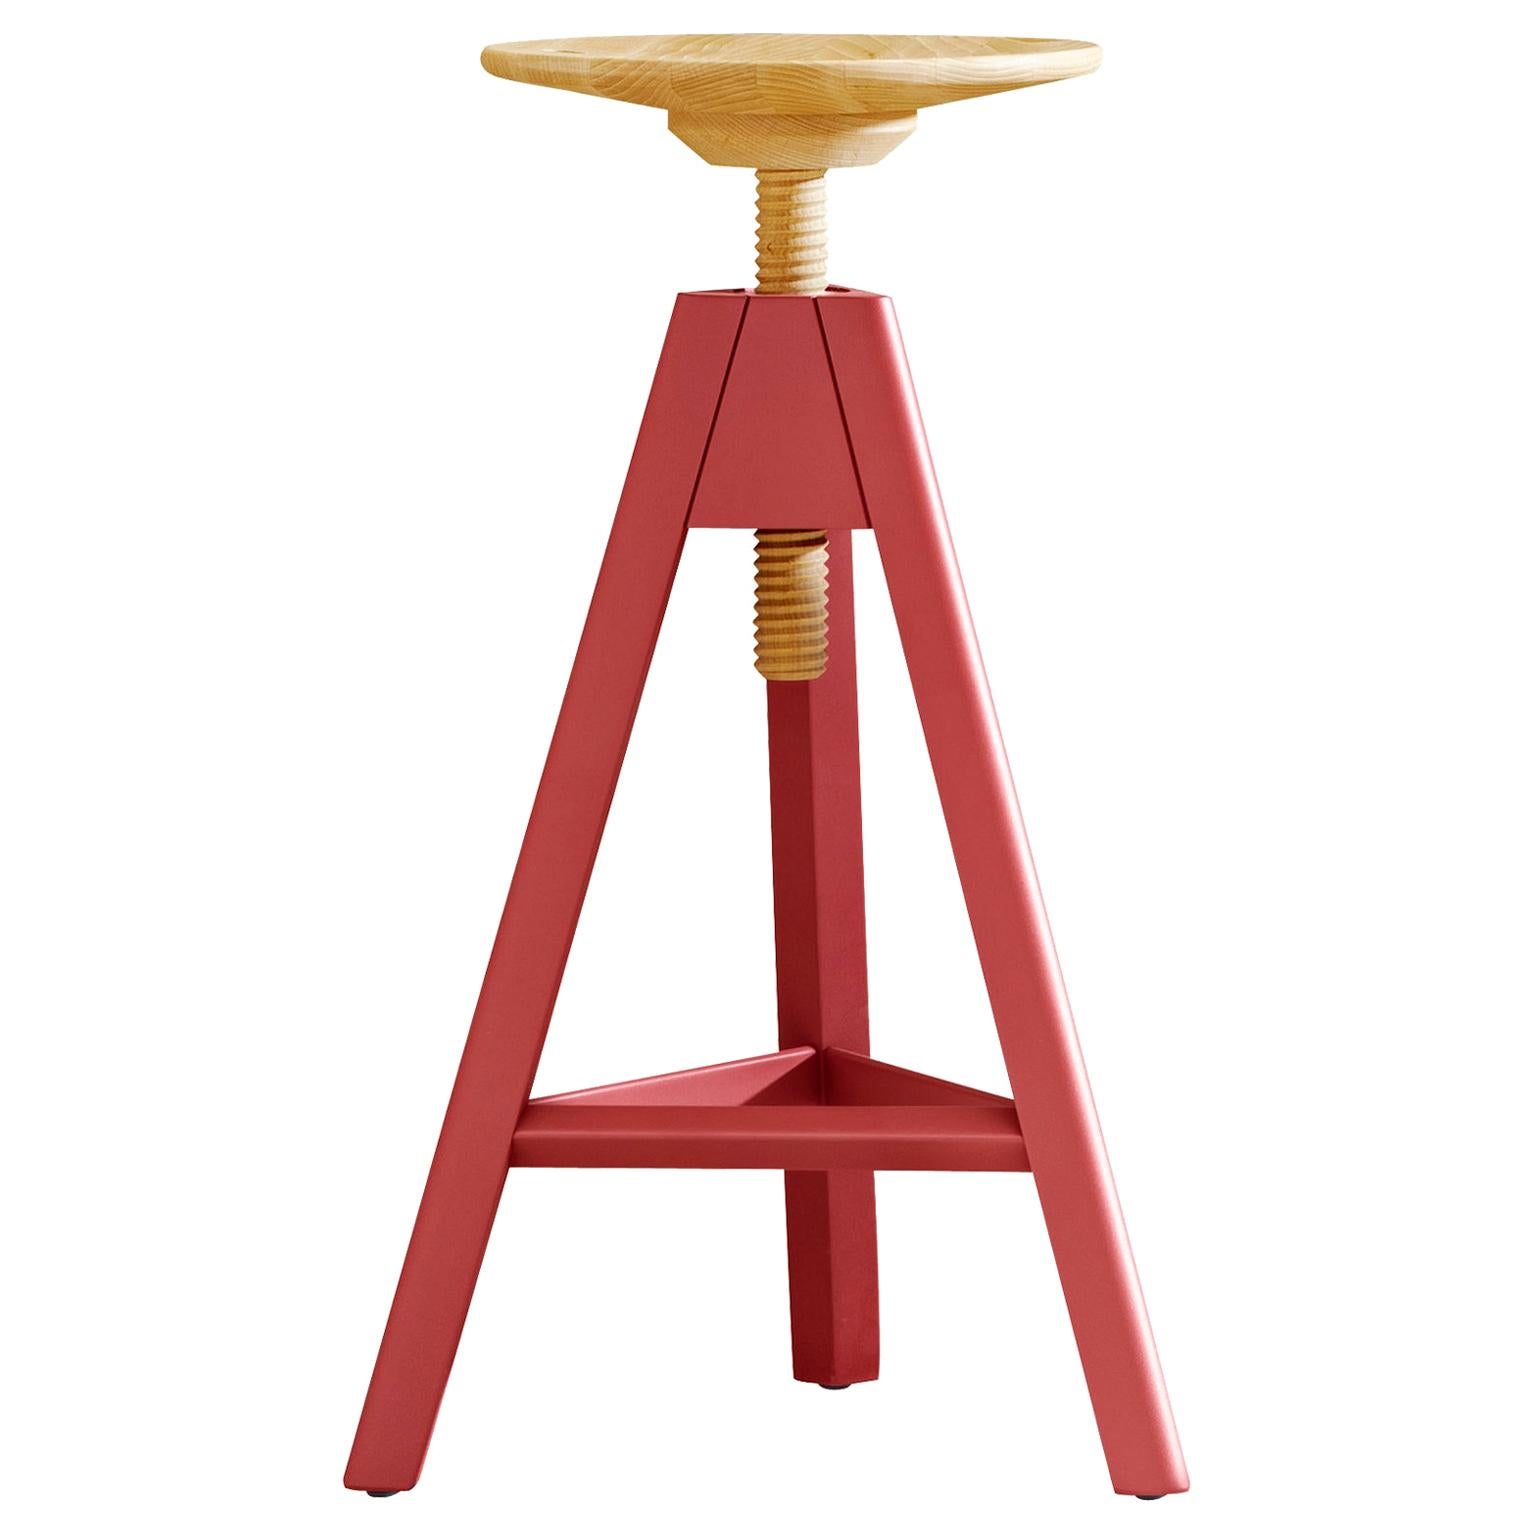 Vitos High Stool in Beach Seat with Marsala Red Legs by Paolo Cappello For Sale